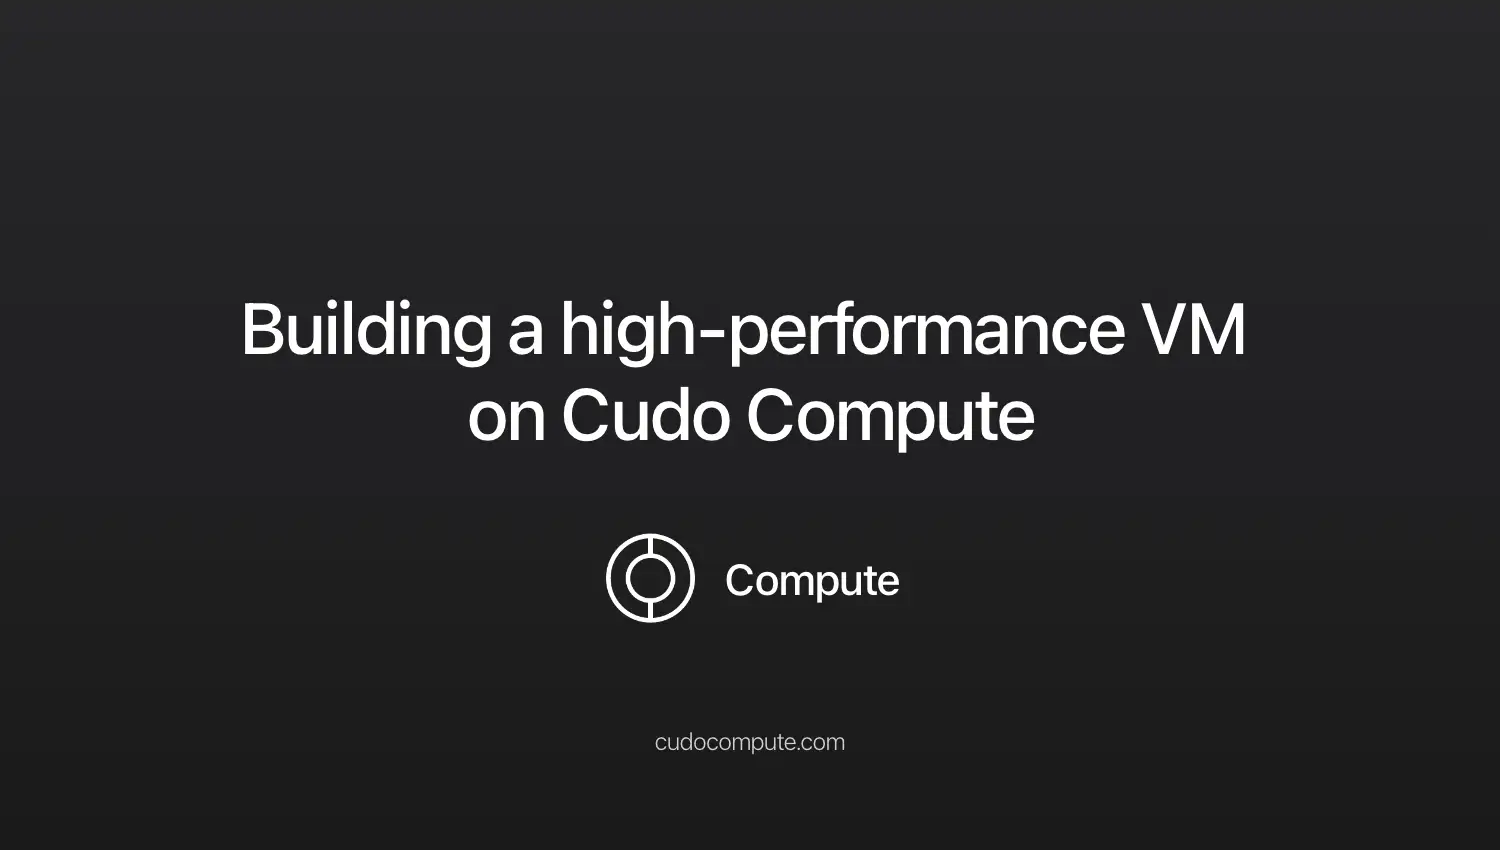 Building a high-performance VM on Cudo Compute cover photo